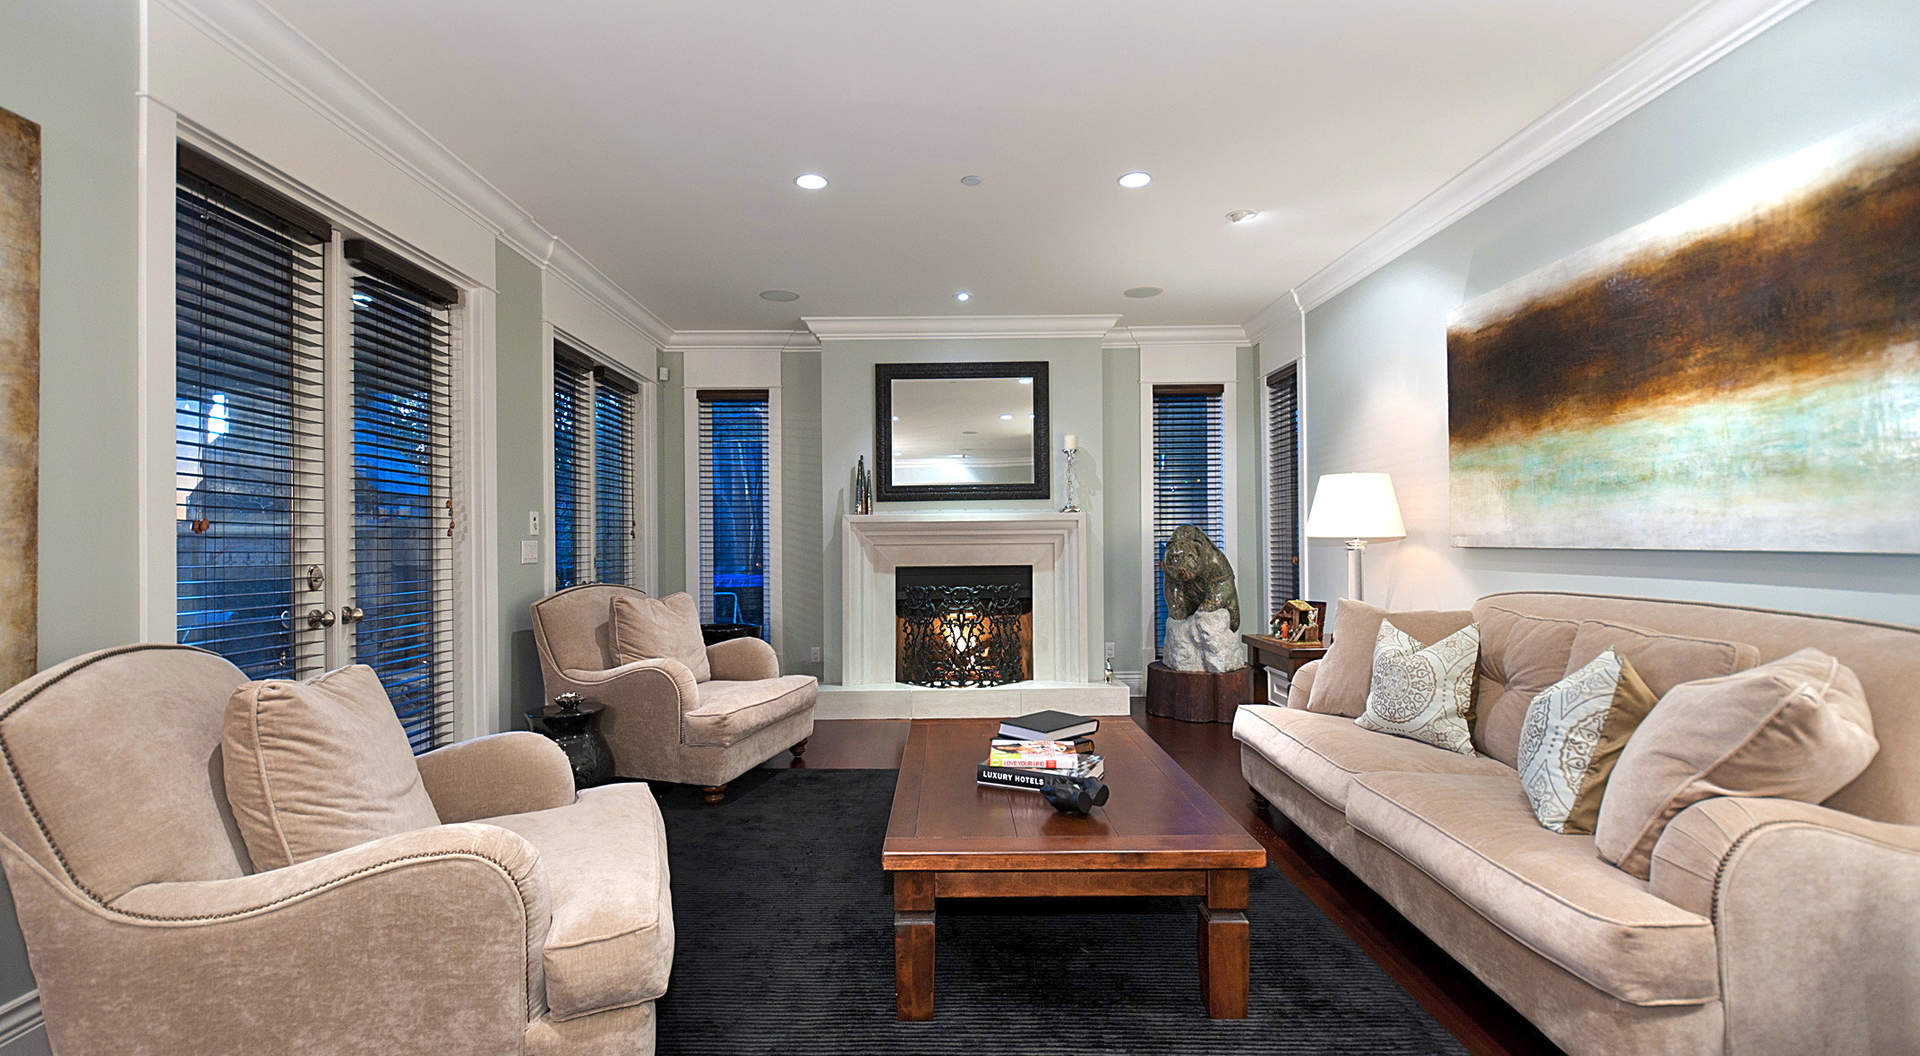 Spacious Living Area with Roaring Fireplace